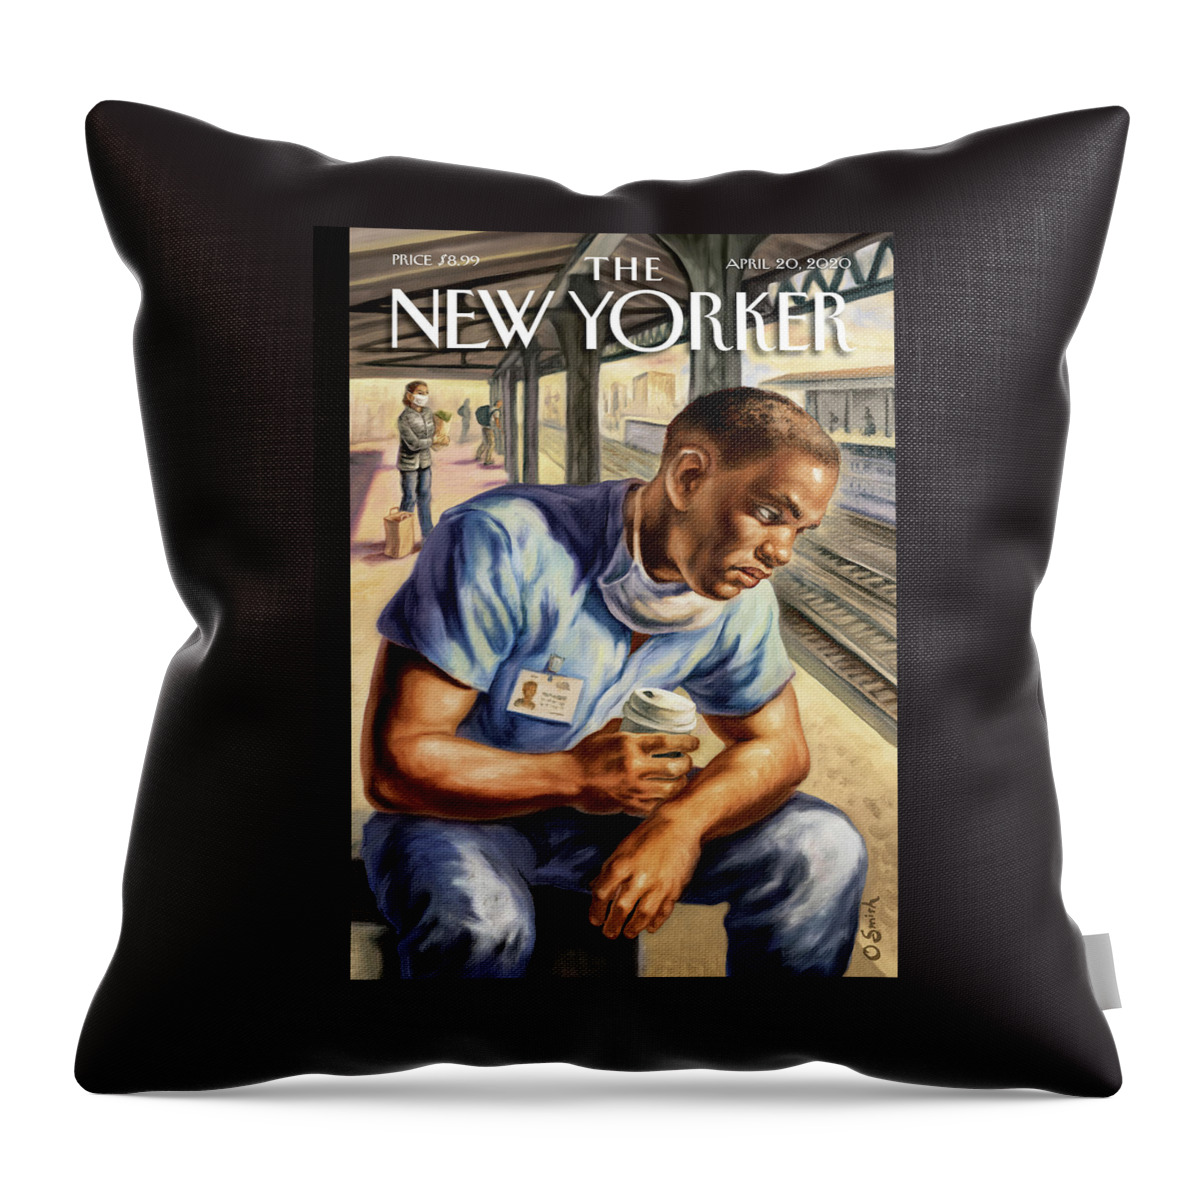 After The Shift Throw Pillow